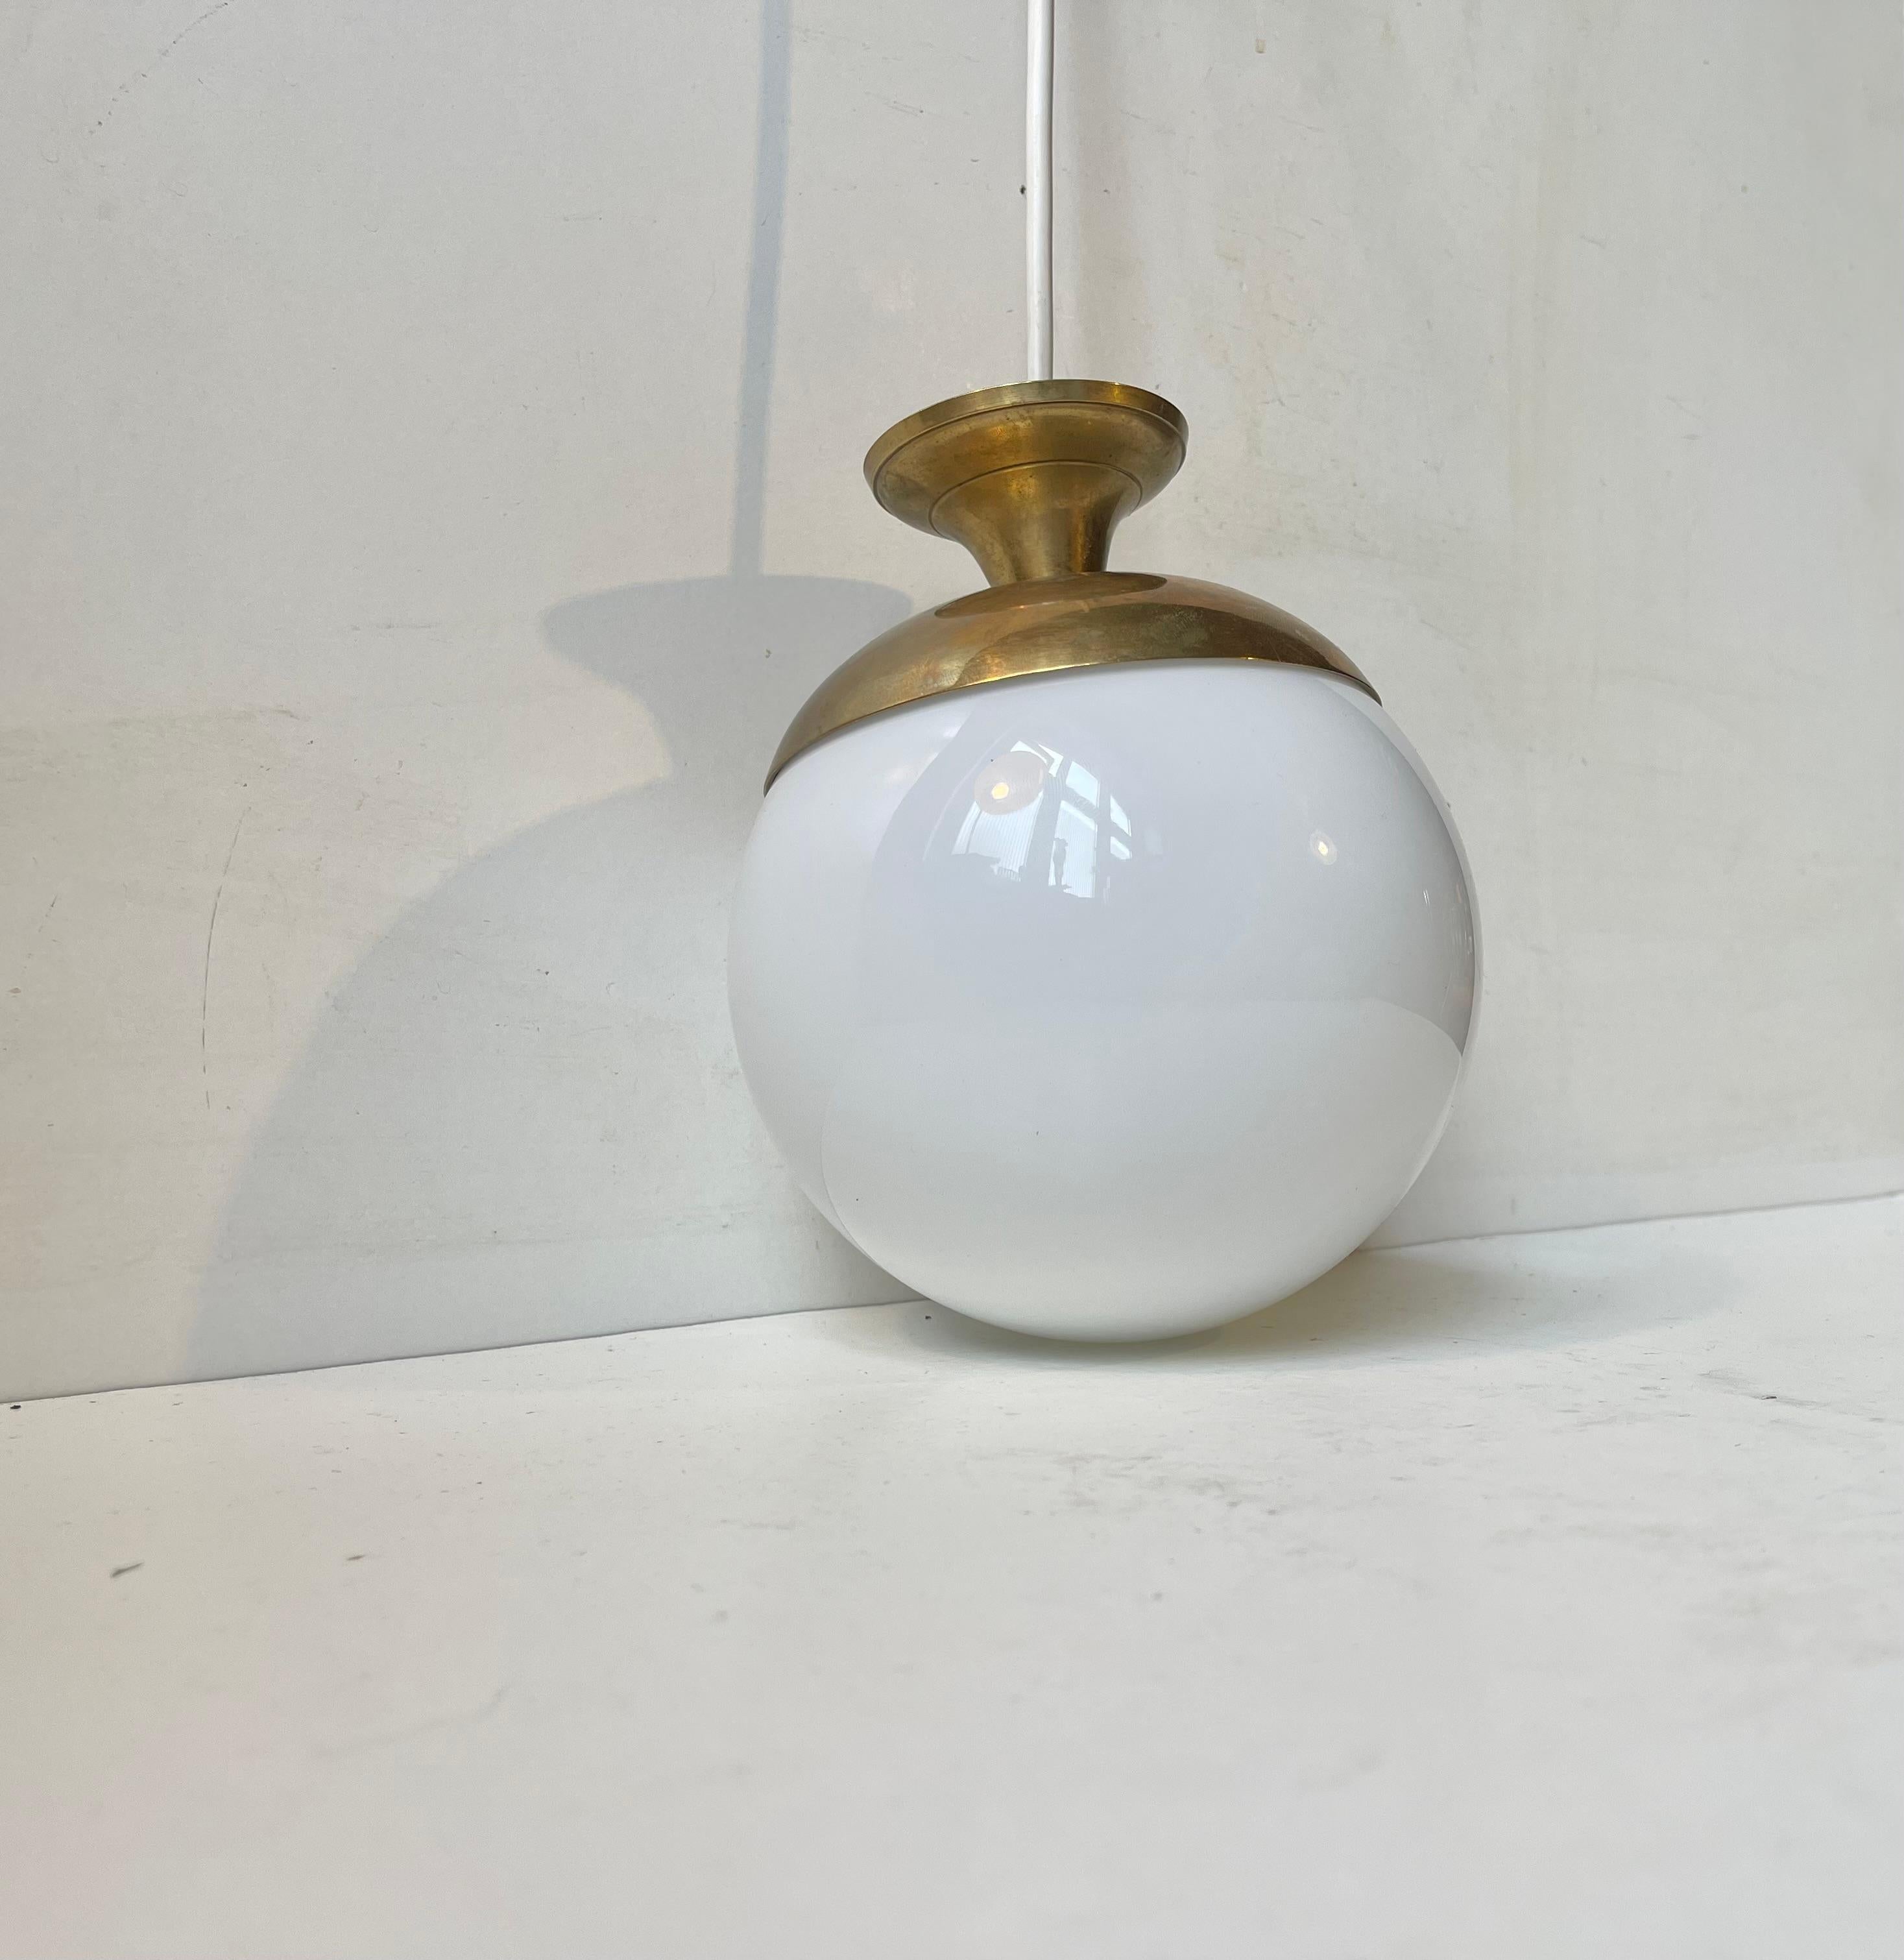 Small stylish hanging light featuring a diablo-shaped brass top and a spherical globe in white opal glass. It was manufactured in Italy during the 1960s. Measurements: H: 20 cm, Diameter: 15 cm. Working and tested vintage order. Comes installed with